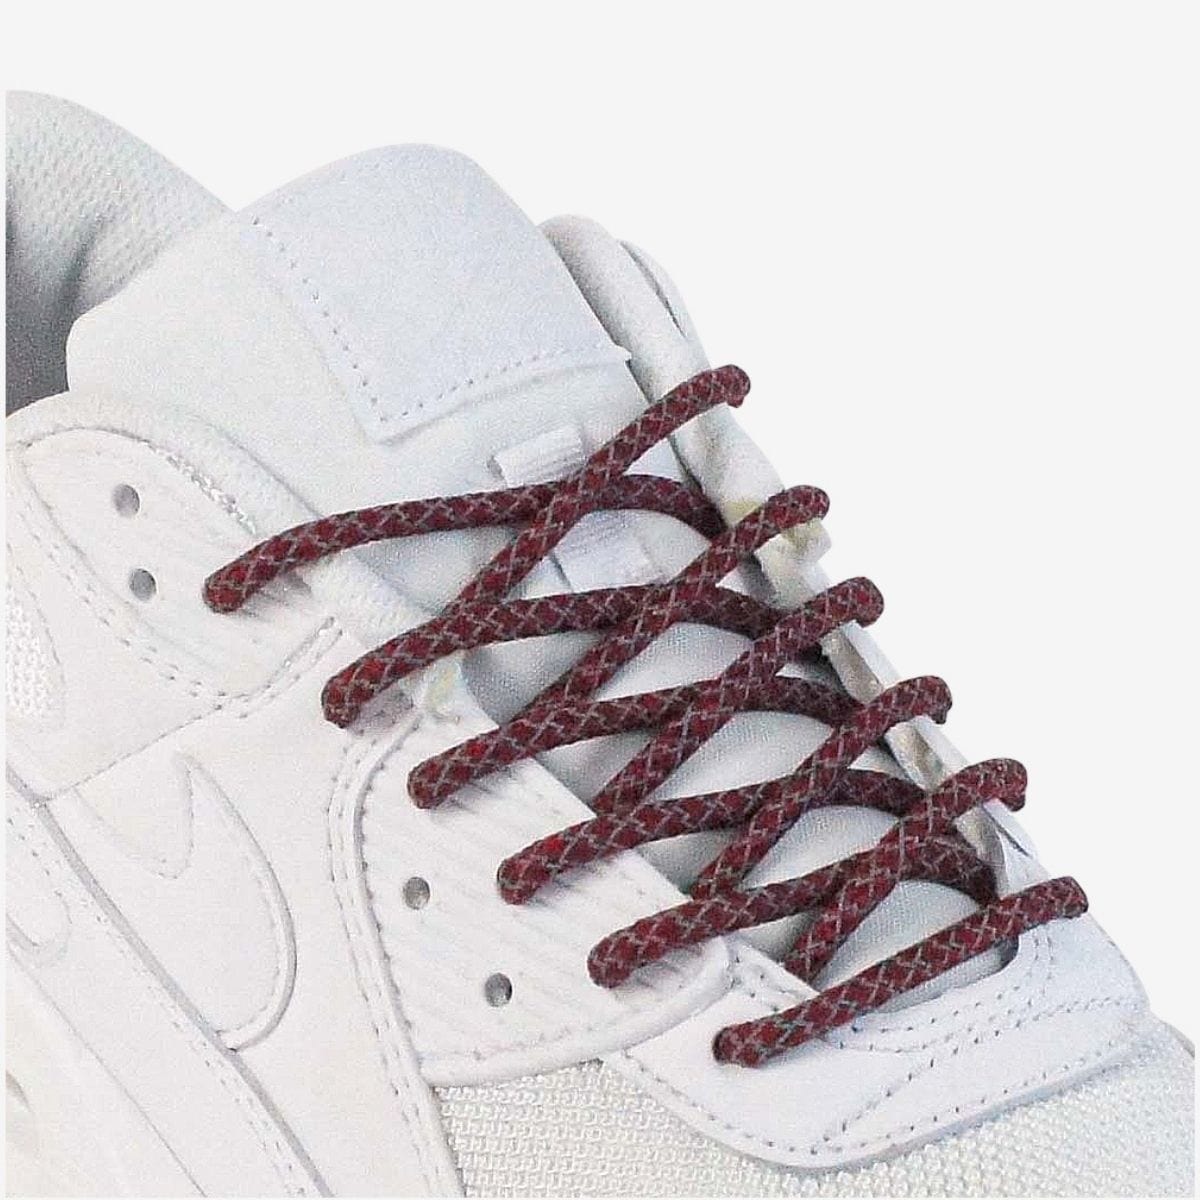 custom-color-shoelaces-on-white-sneakers-with-reflective-dark-red-laces